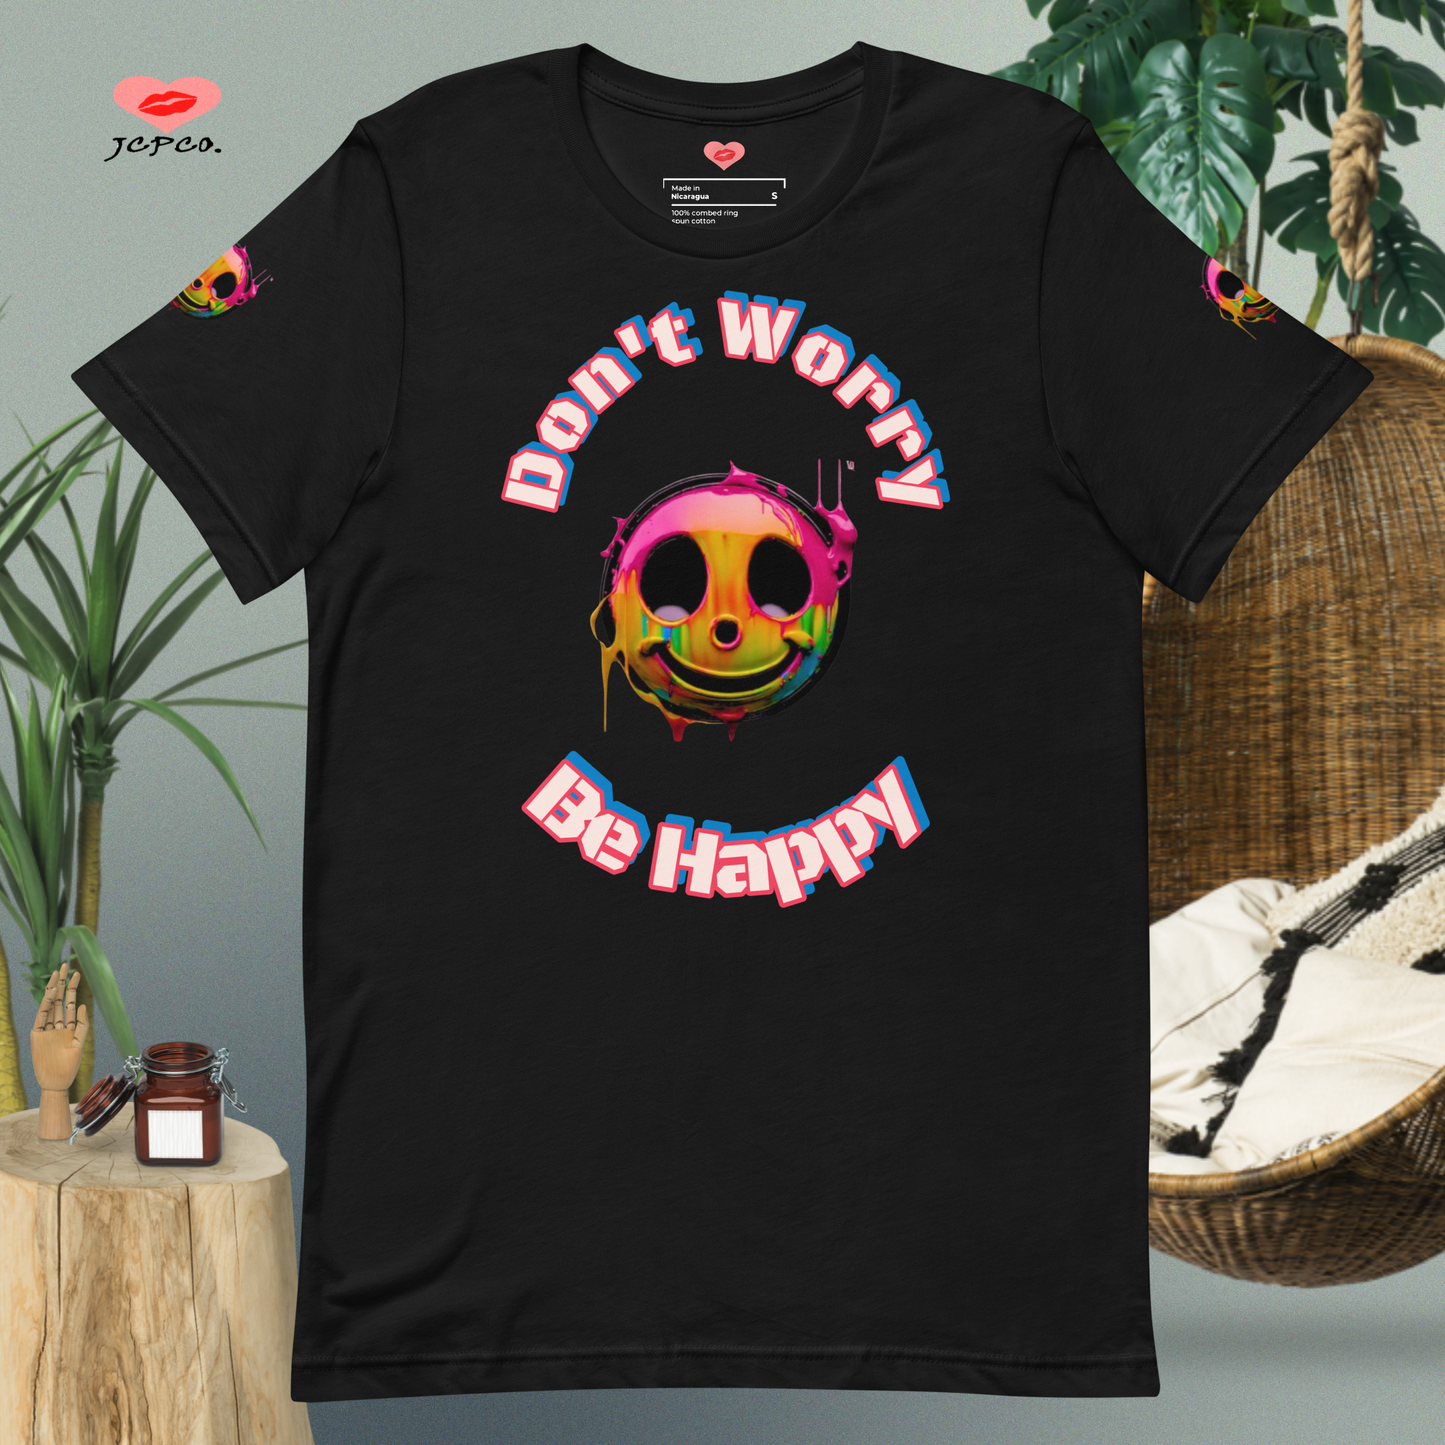 💕Don't' Worry Be Happy Unisex T-Shirt👕